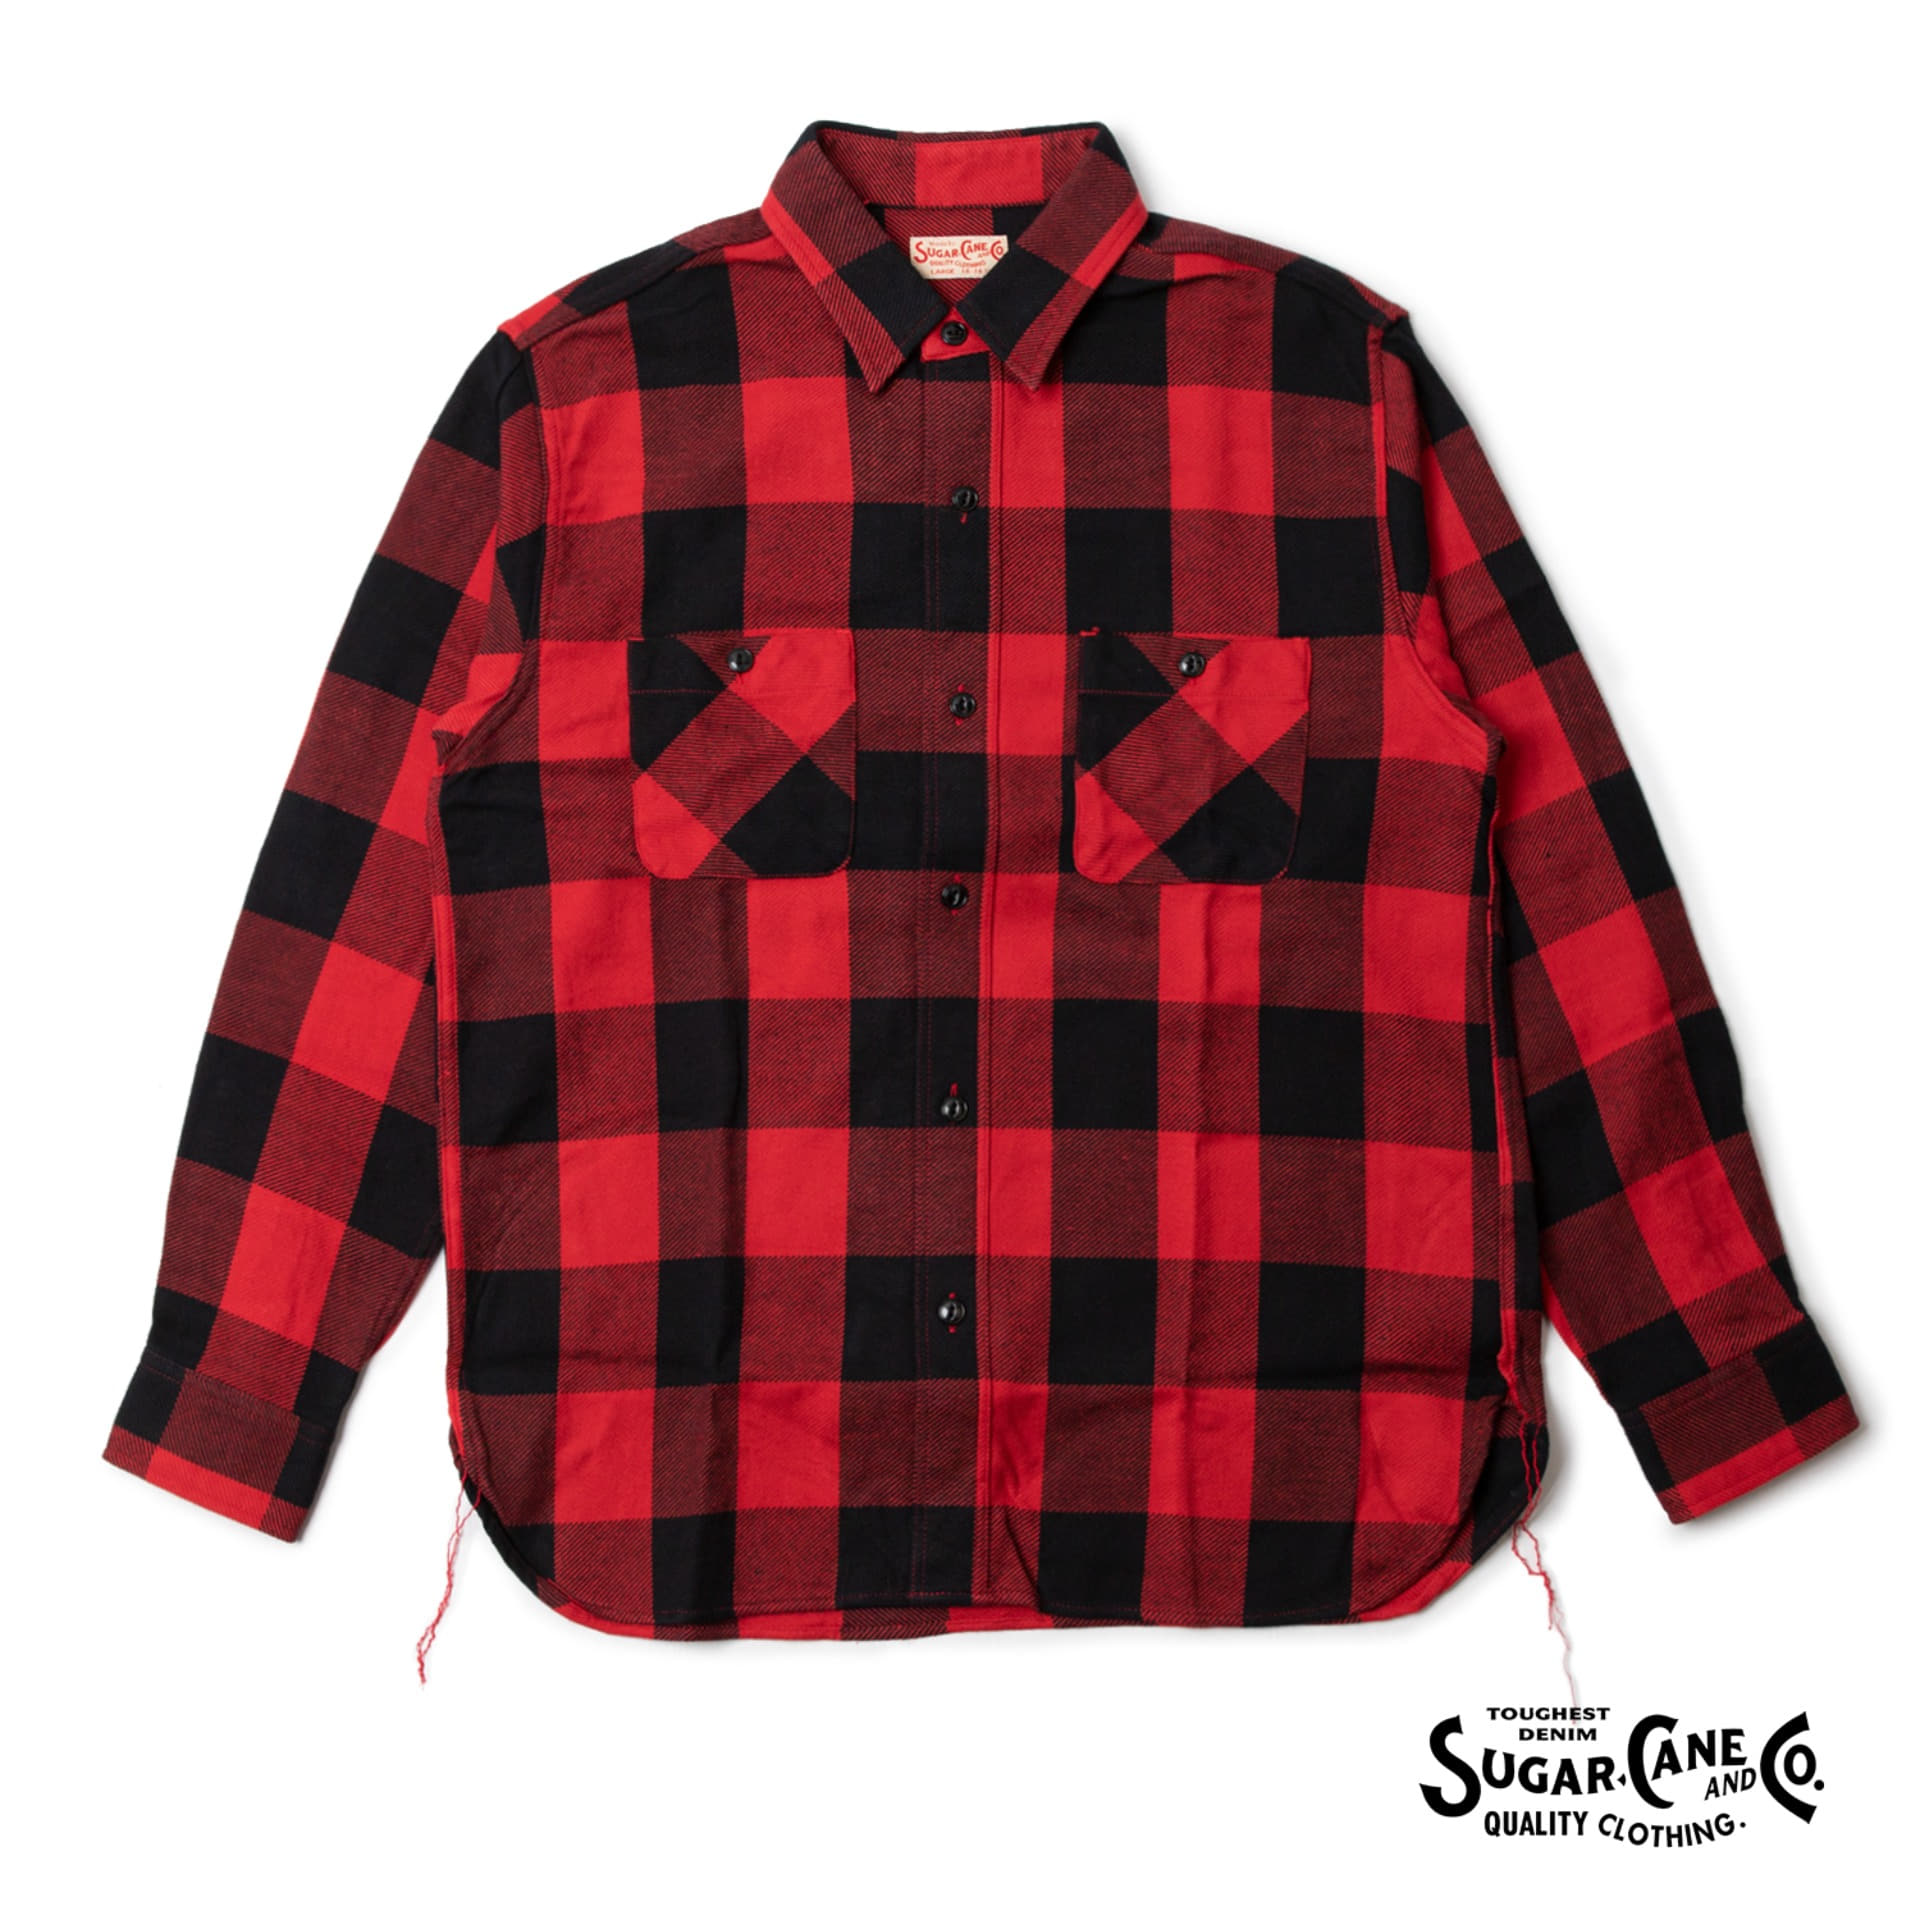  SC28952 Buffalo Check L/S Flannel Work Shirts  (Red)